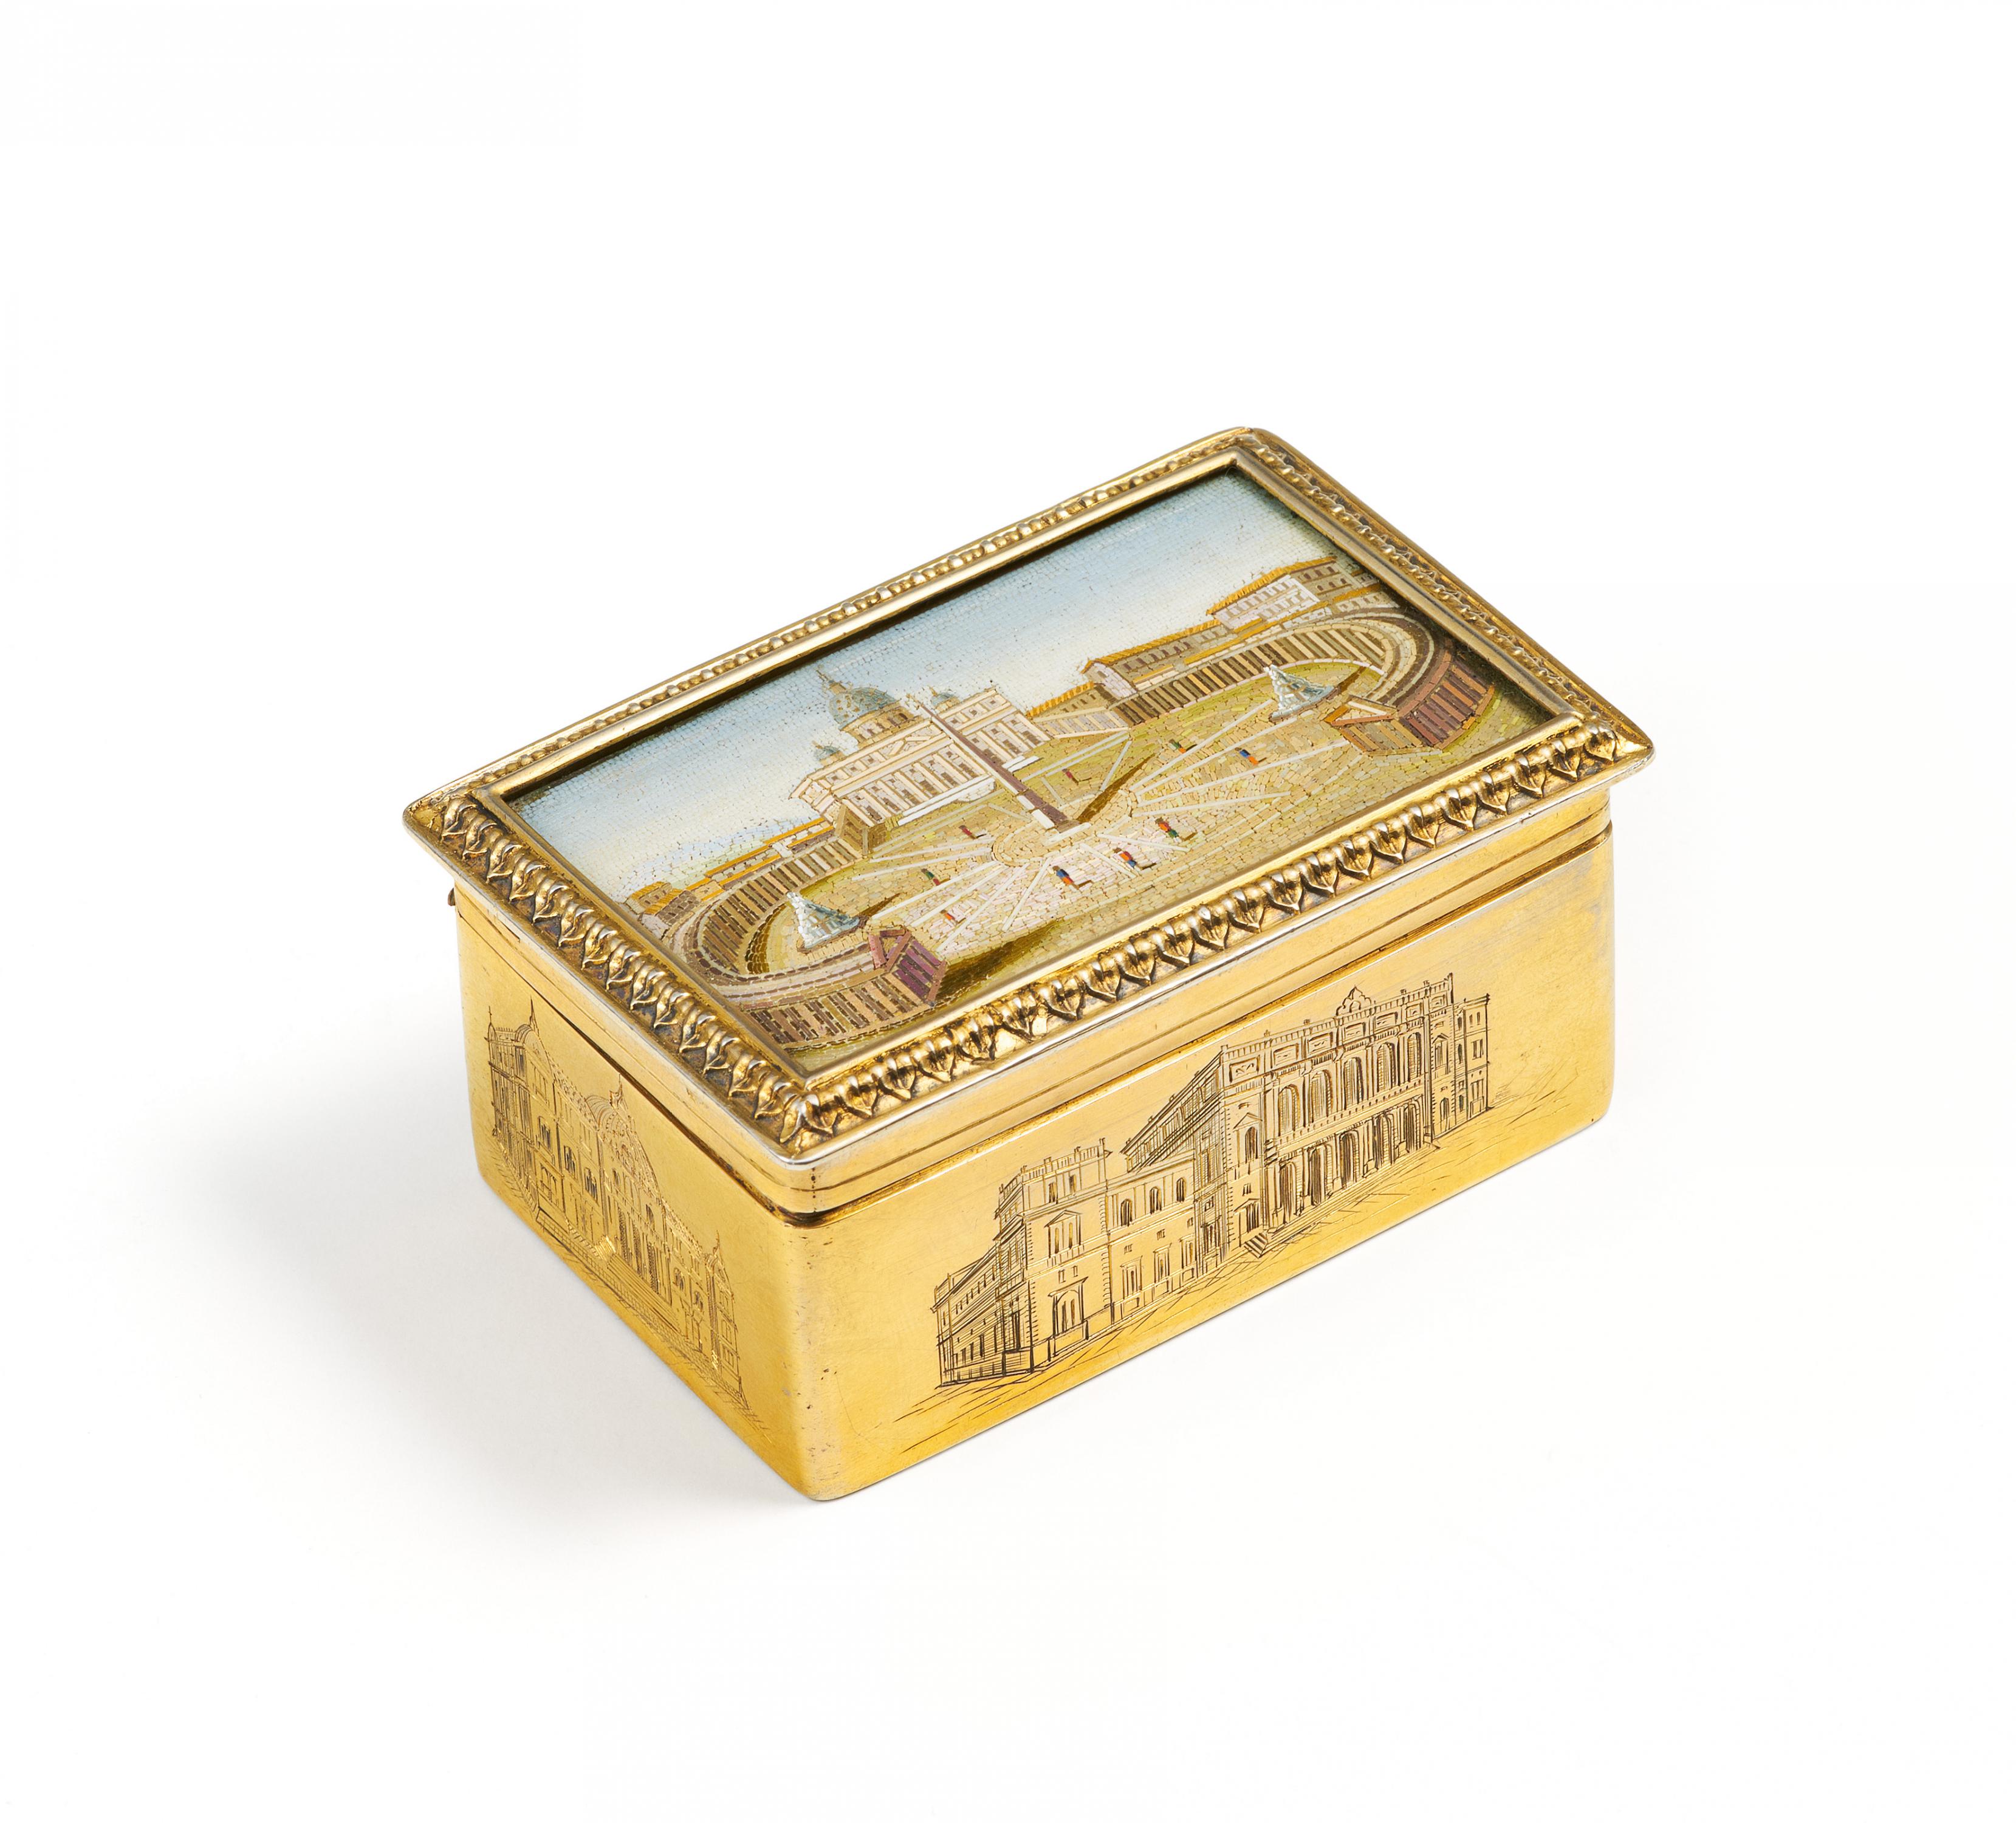 Two exquisite gilt silver and glass snuffboxes with cityscapes of rome in micro mosaic - Image 8 of 14